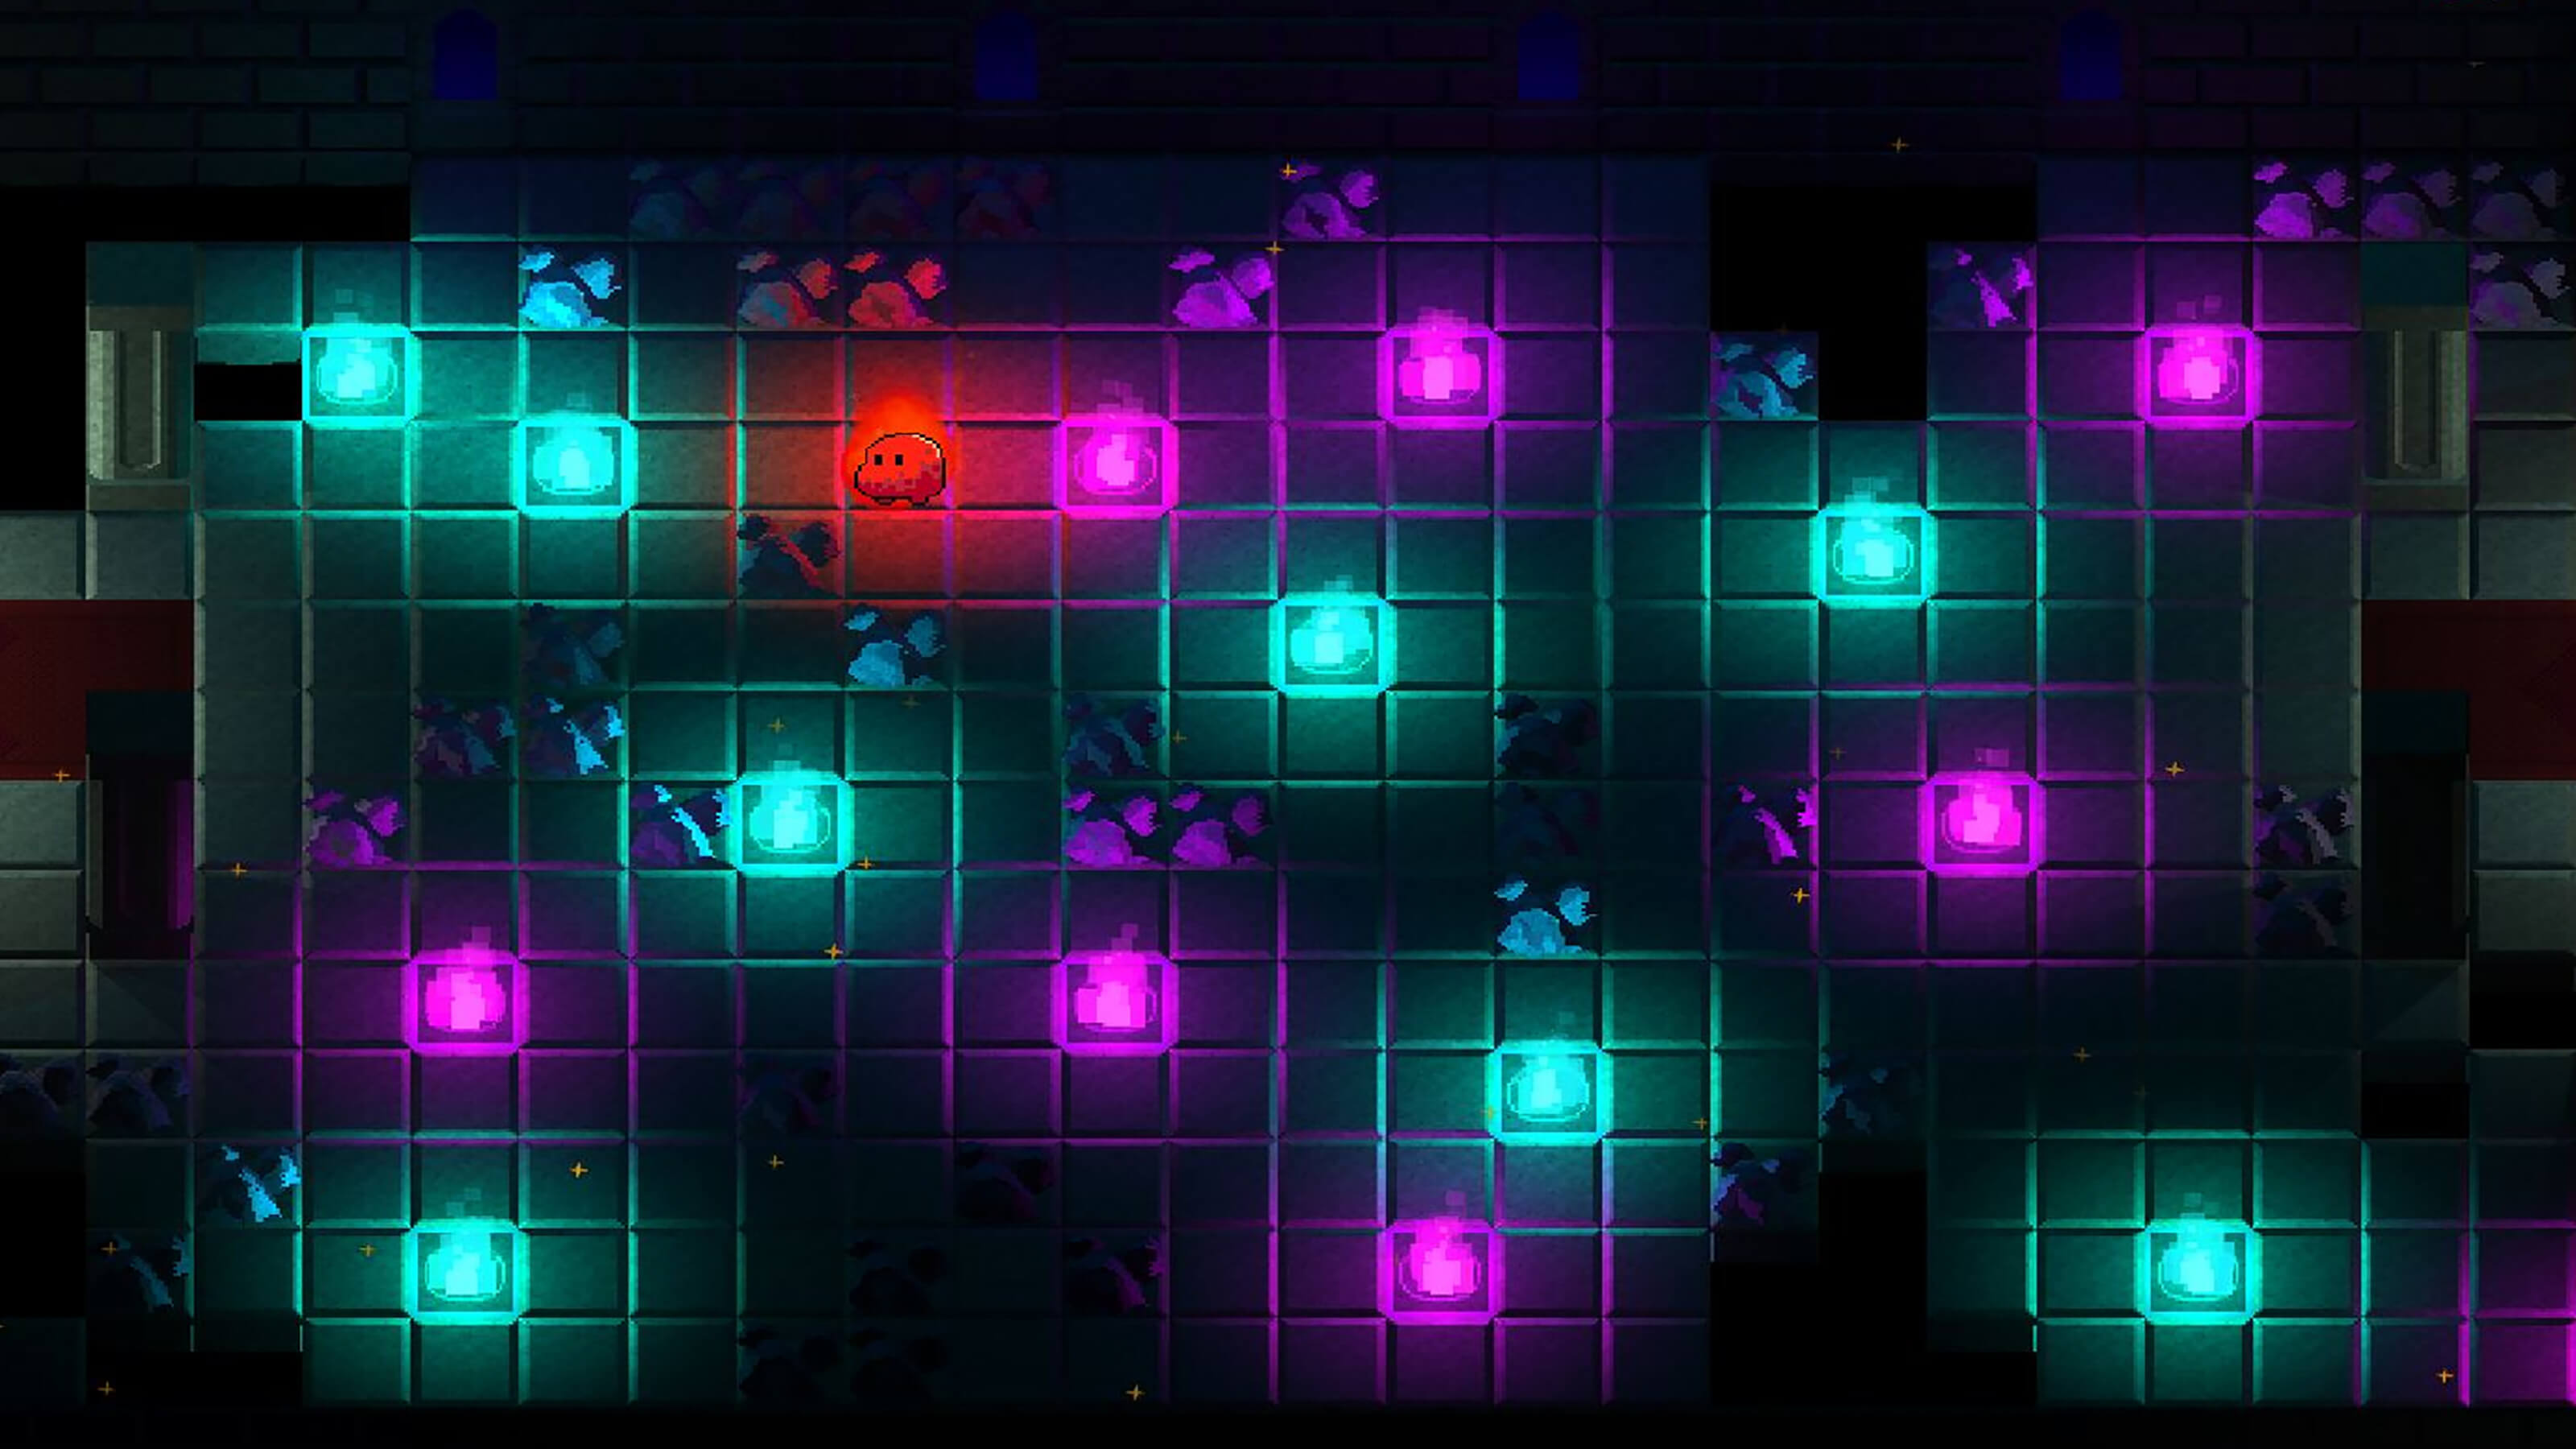 A red flame gooey stands next to turquoise and purple lanterns in a gridded room.